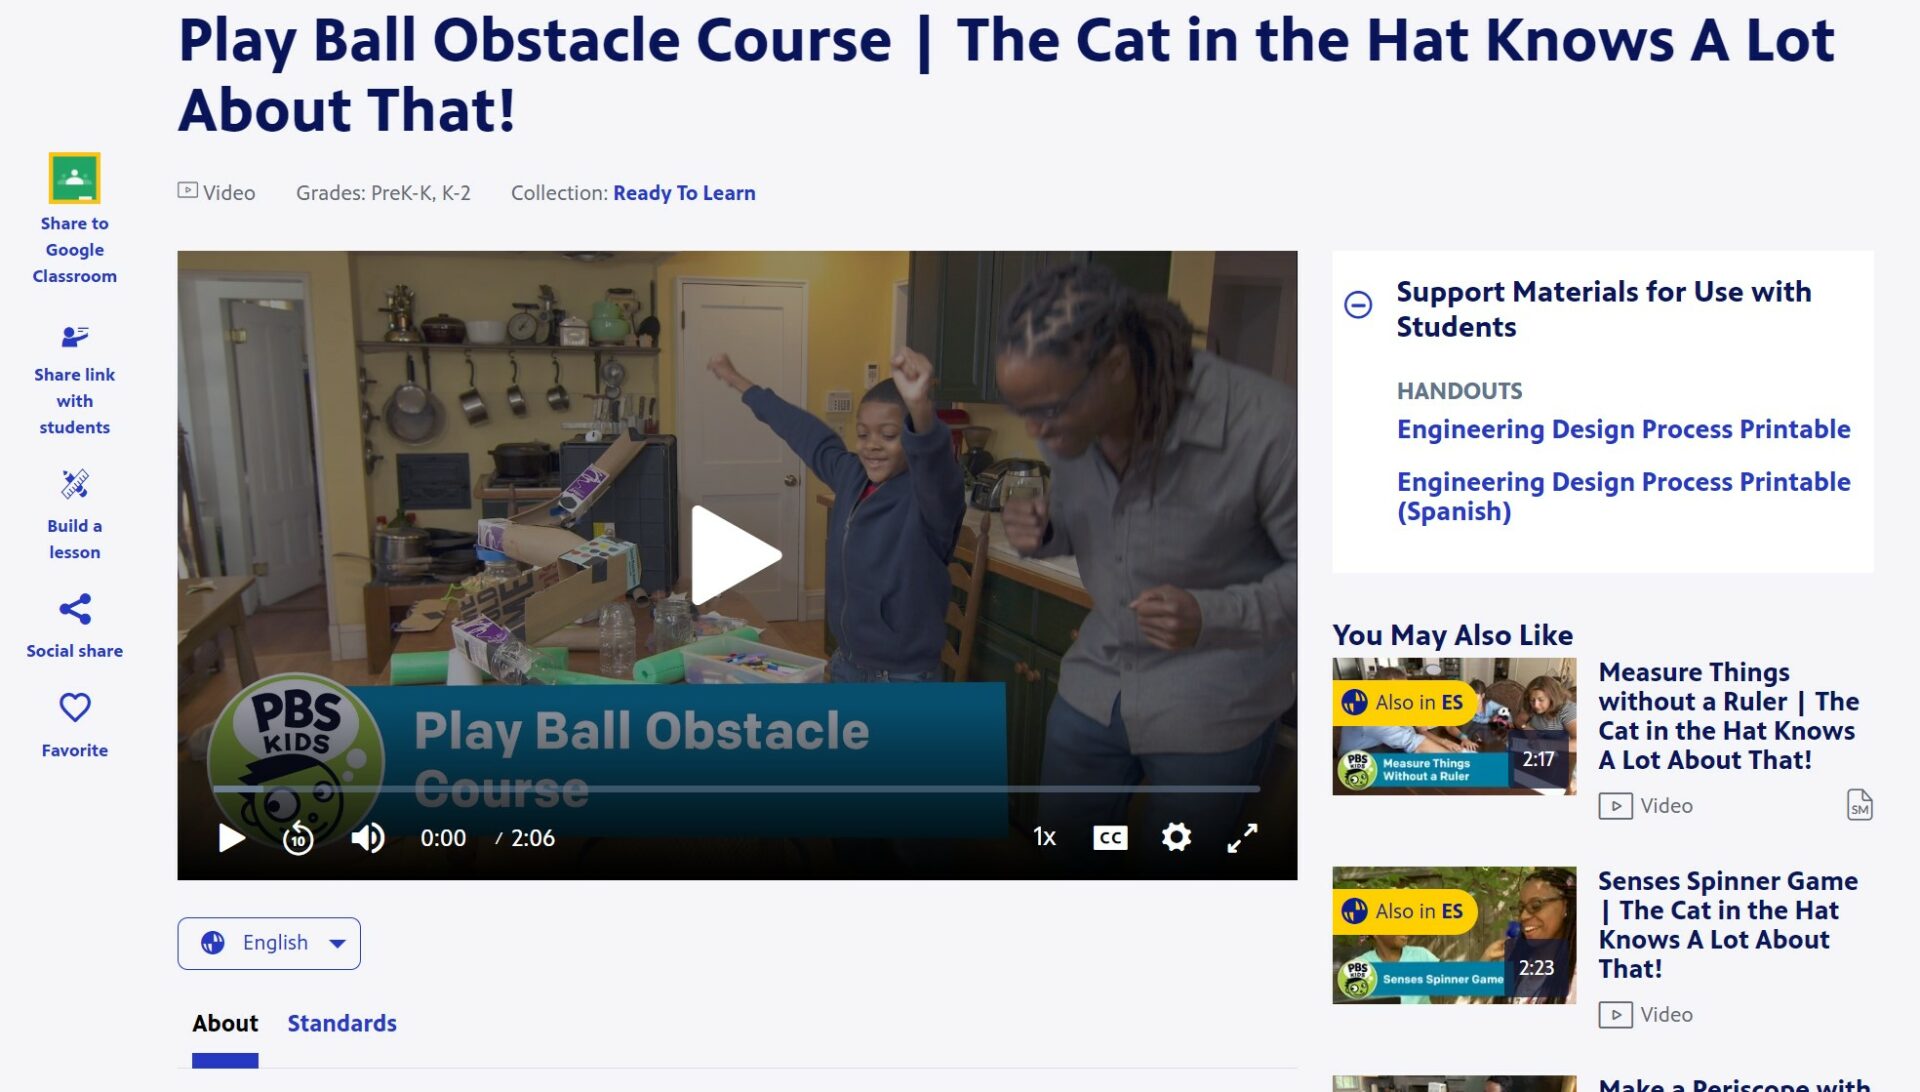 Play Ball Obstacle Course | The Cat in the Hat Knows A Lot About That!